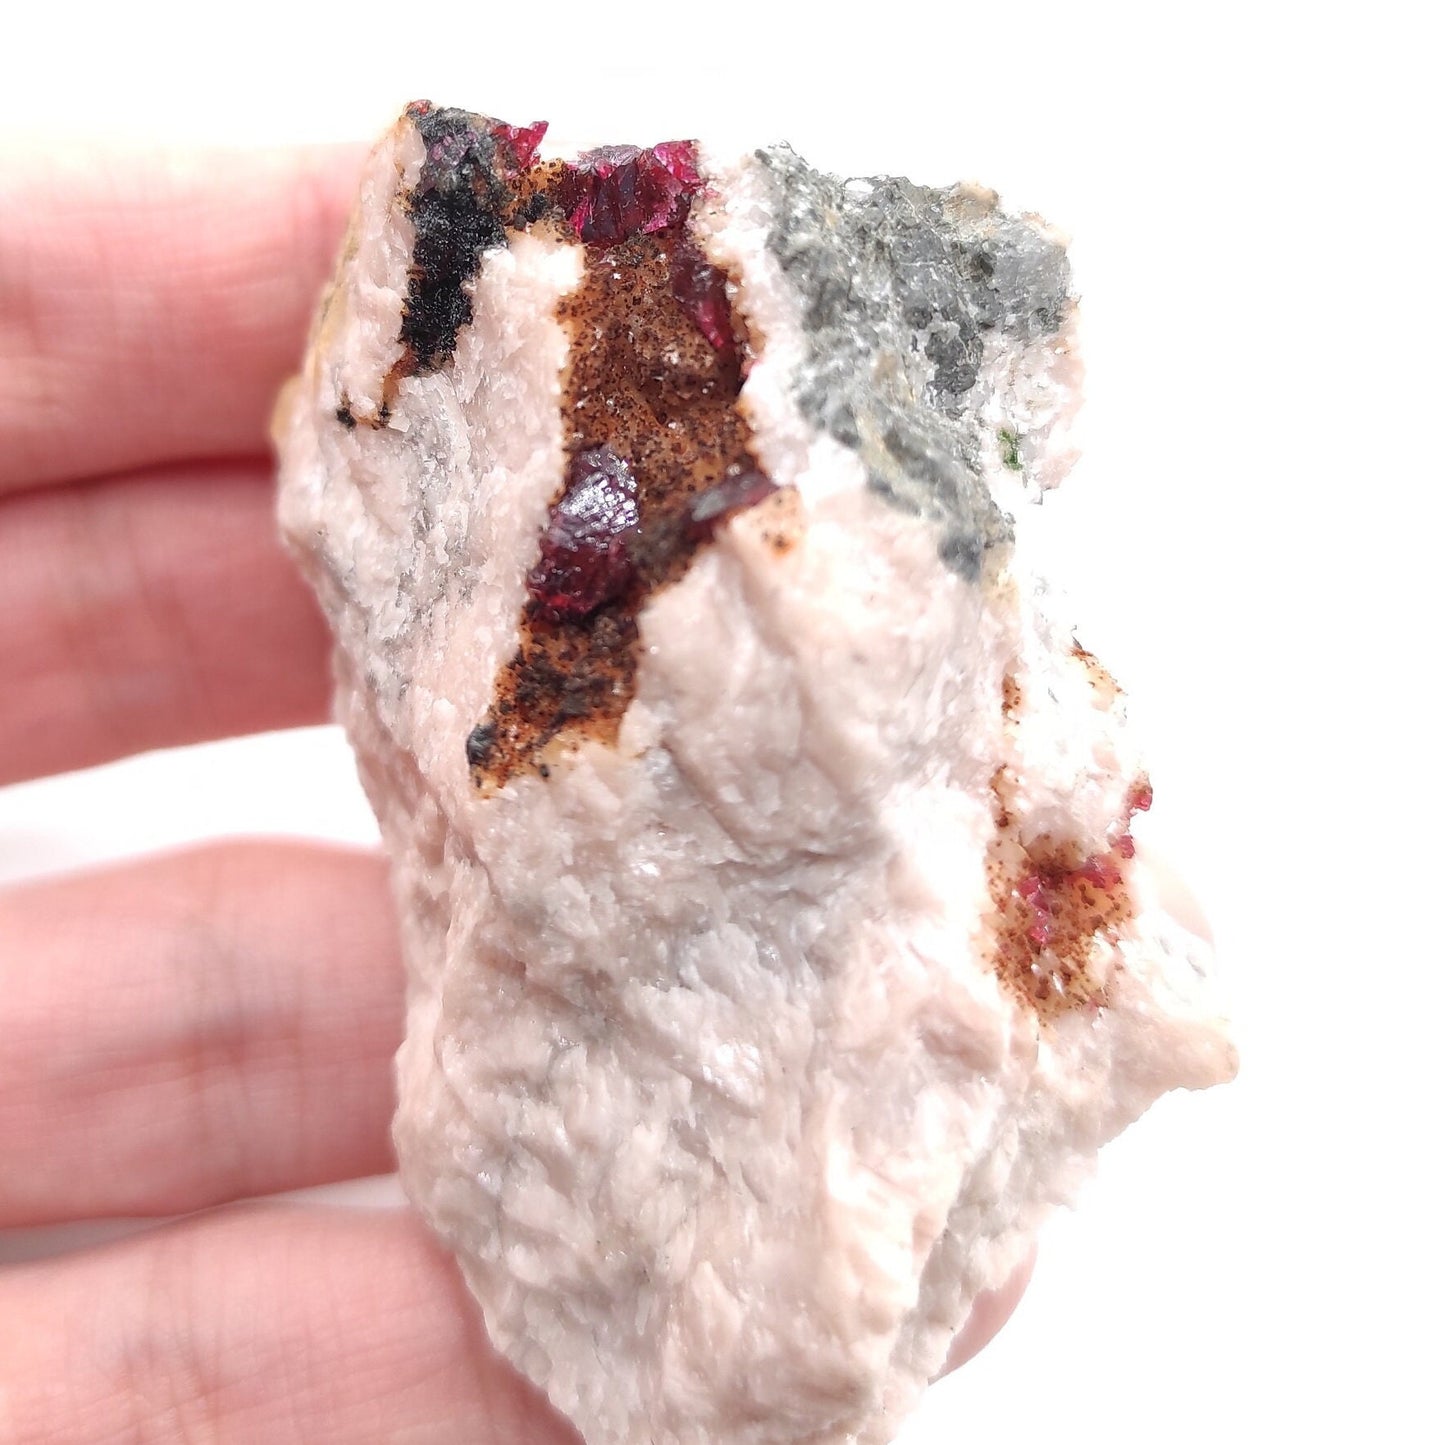 62g Roselite on Matrix from Bou Azzer, Morocco - Rare Pink Roselite Mineral - Rare Mineral Specimen - Natural Crystals - Rough Gemstones